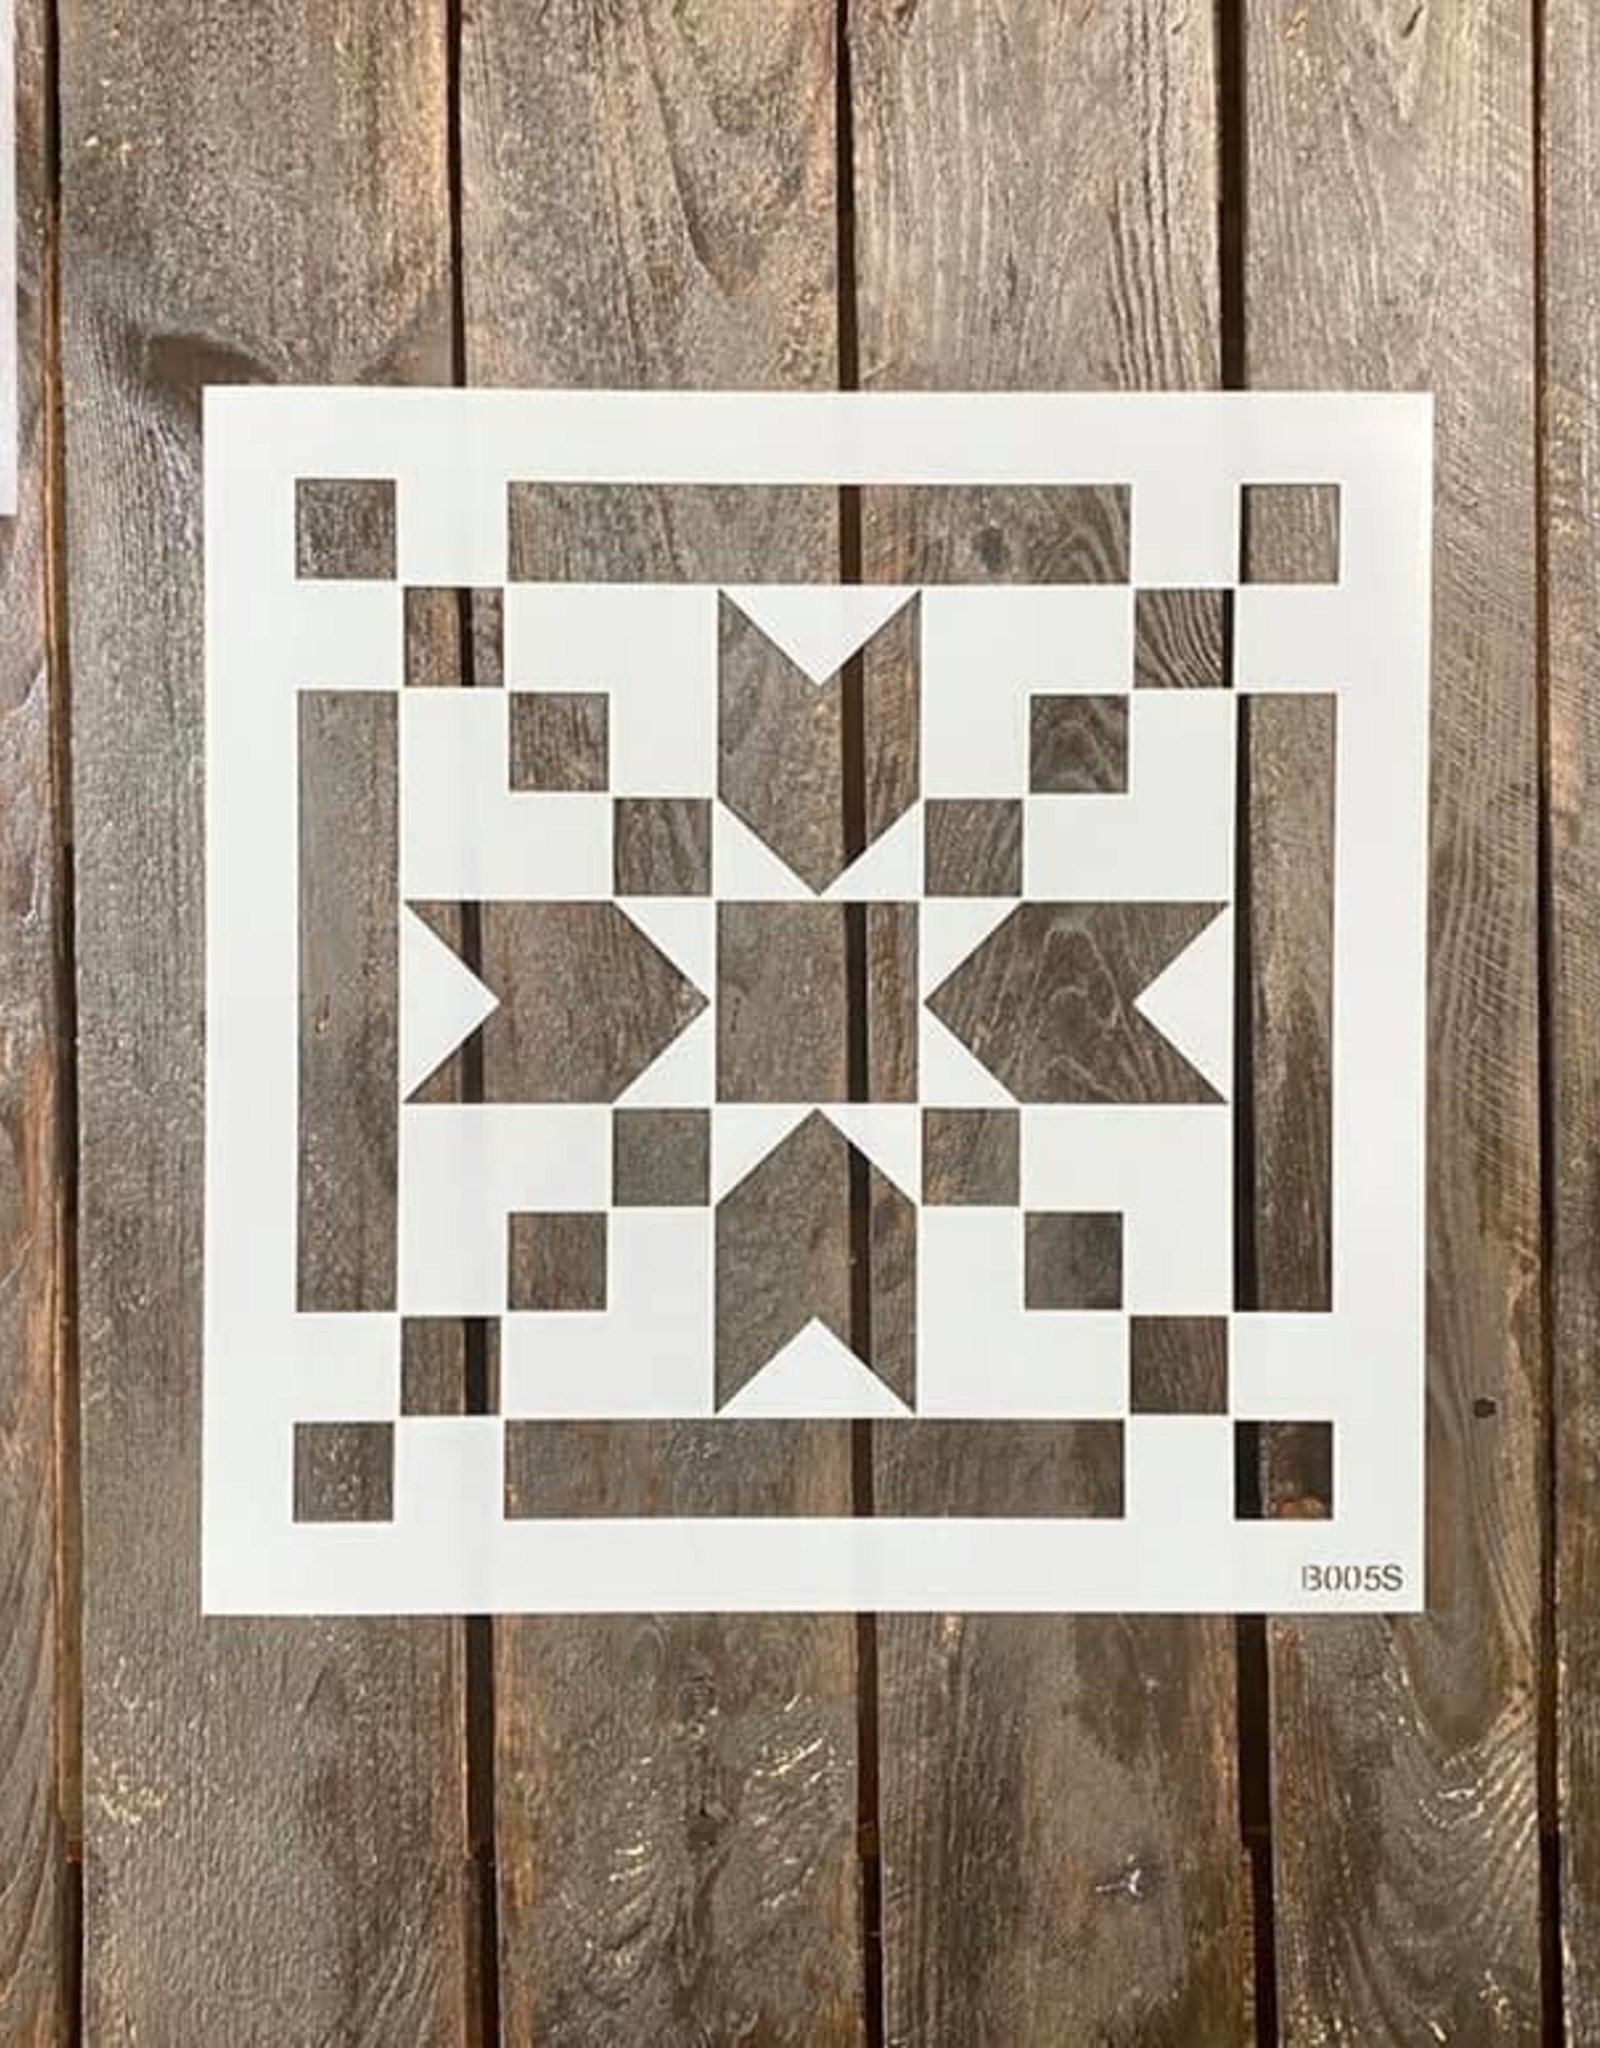 Baker's Nest's Stepping Stones Barn Quilt Stencil - Small 10"